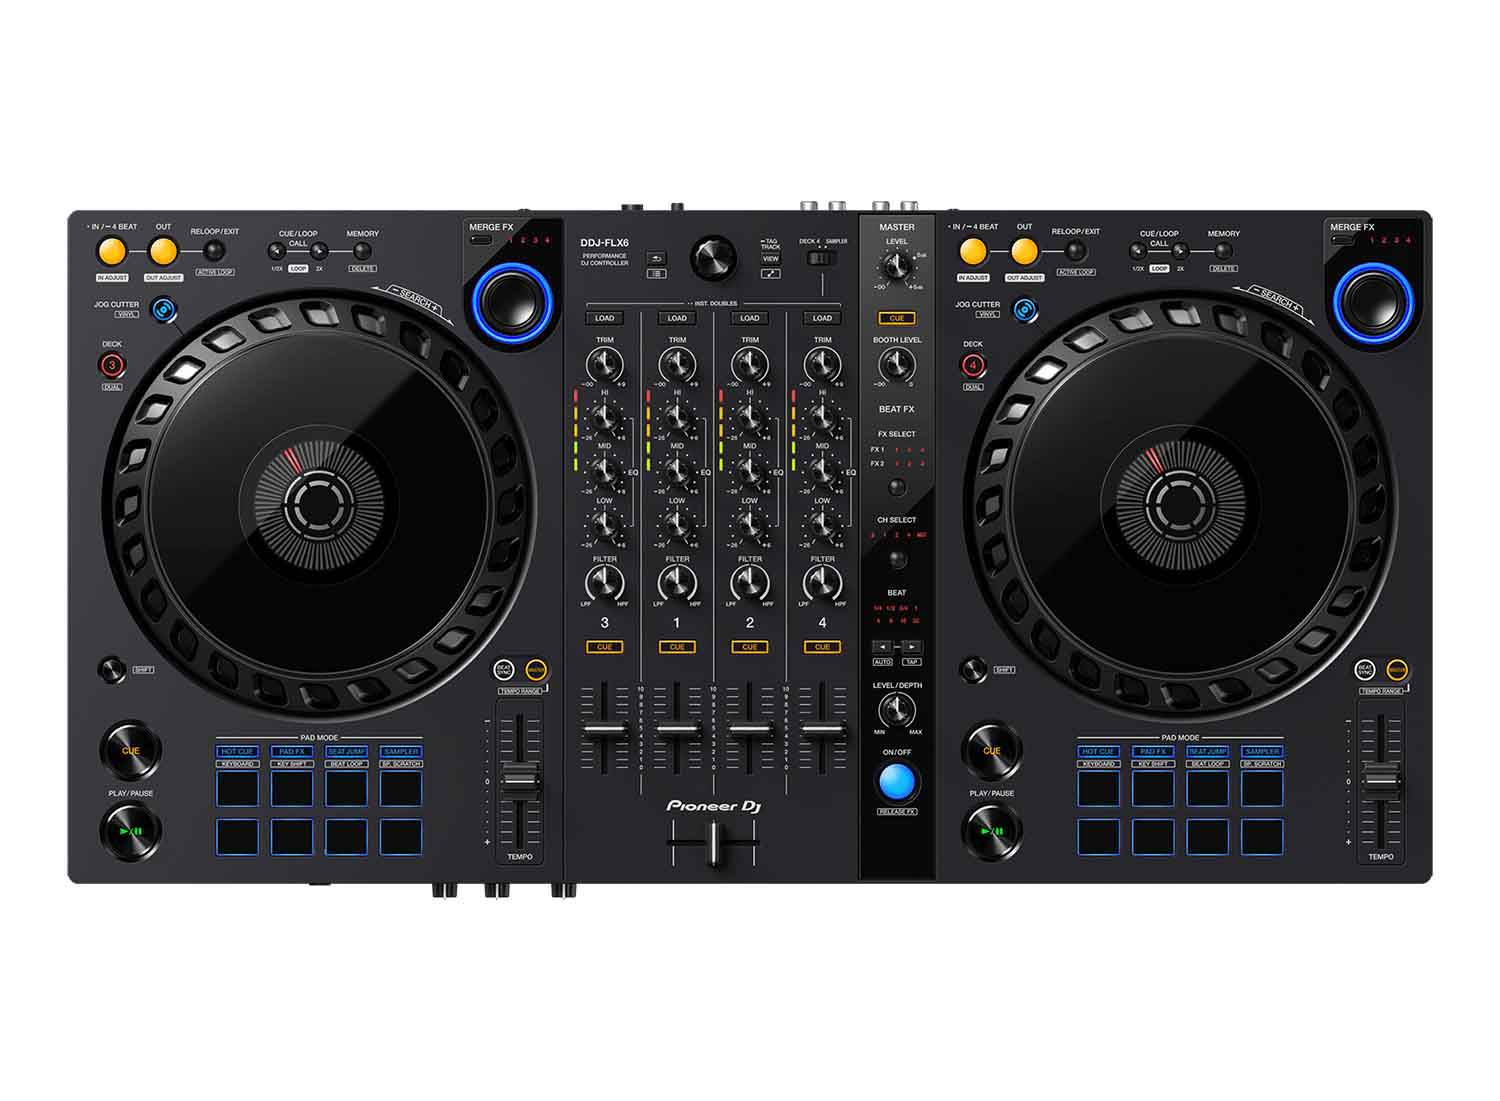 DJ Package for Club with Pioneer DJ Controller, Case, Headphones, Loudspeaker, Cable and LED Lighting System - Hollywood DJ